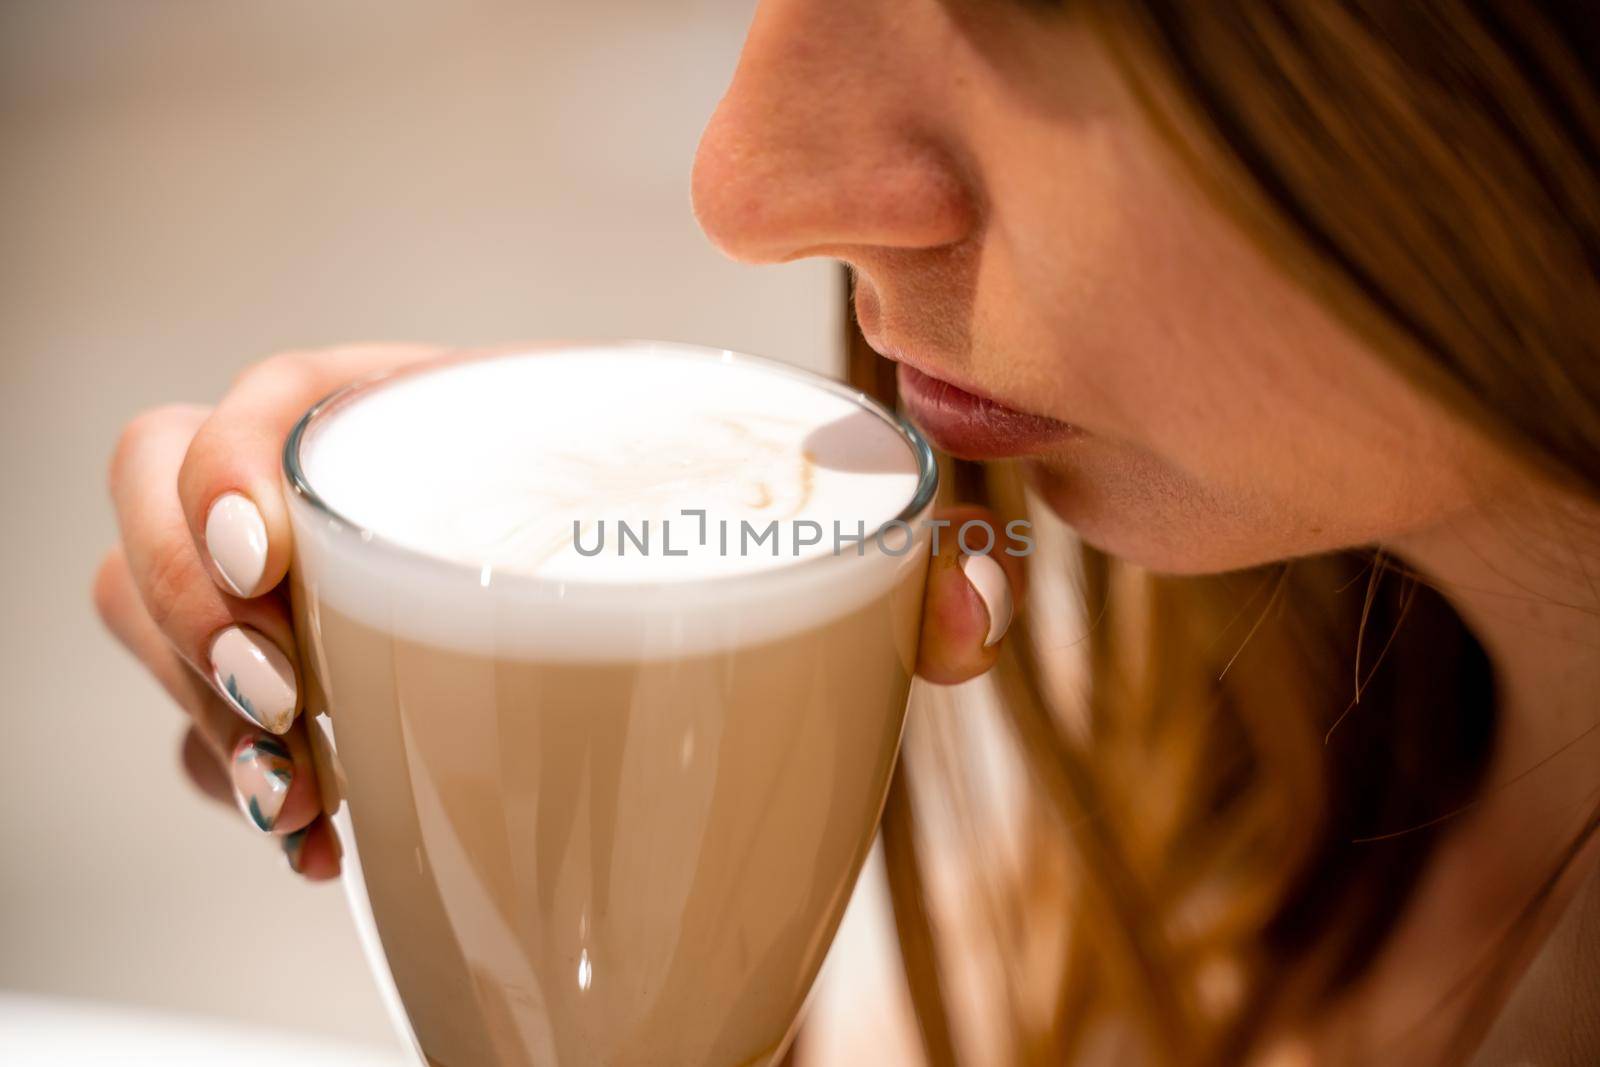 Close-up of beautiful female hands holding a large white cup of cappuccino. A woman is sitting in a cafe